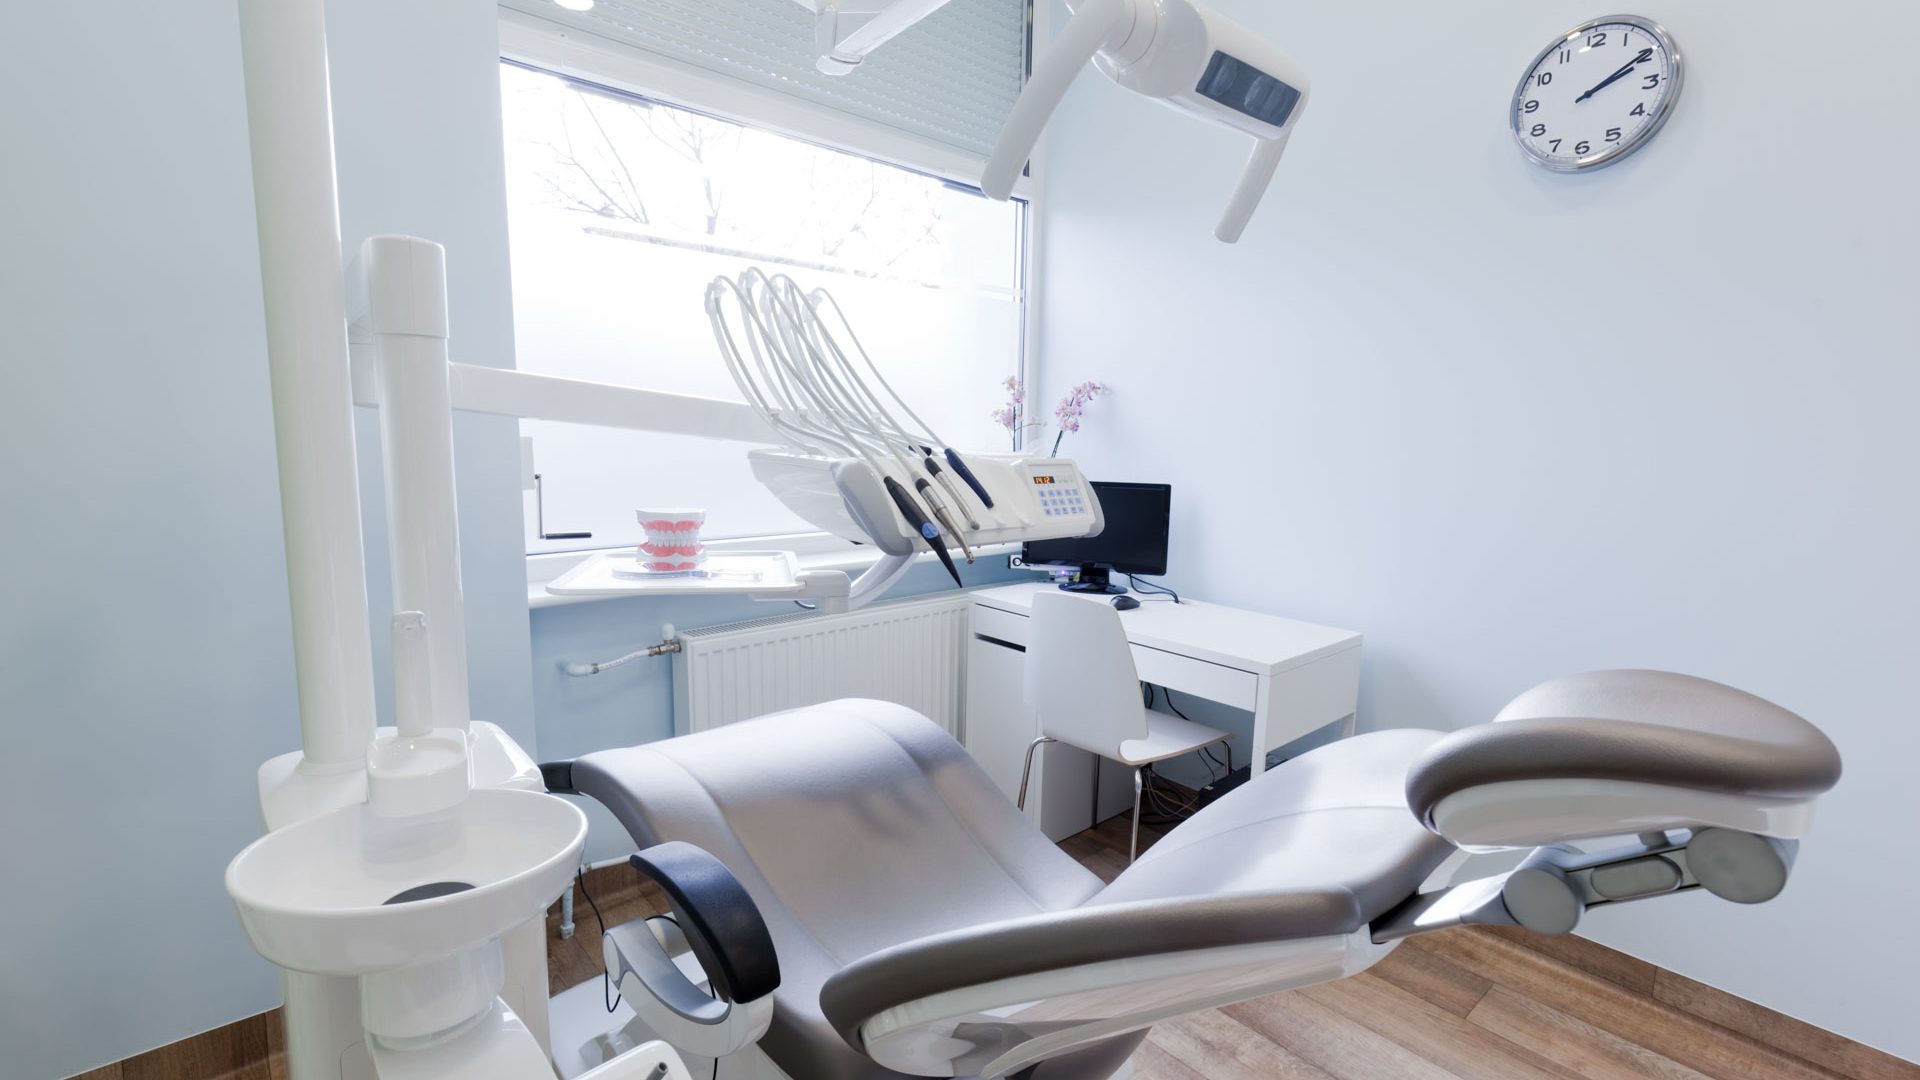 We clean health centres and dentists